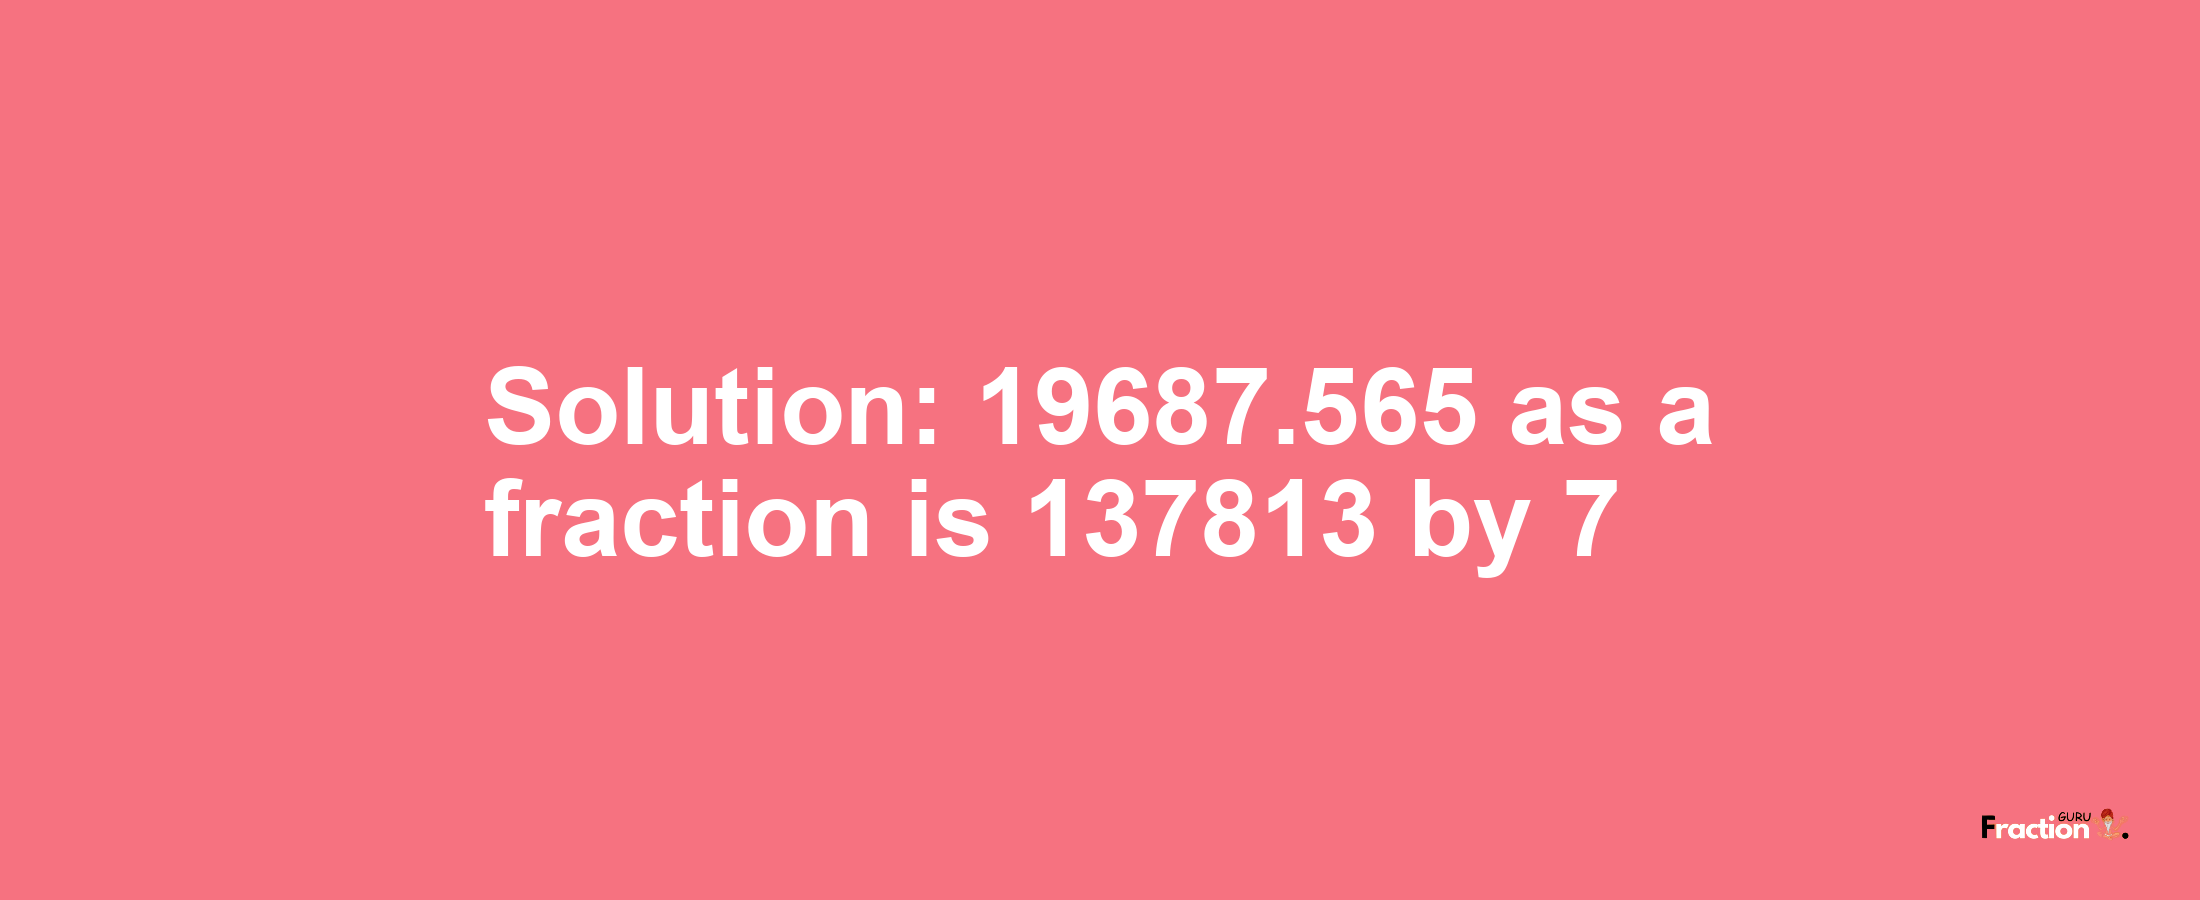 Solution:19687.565 as a fraction is 137813/7